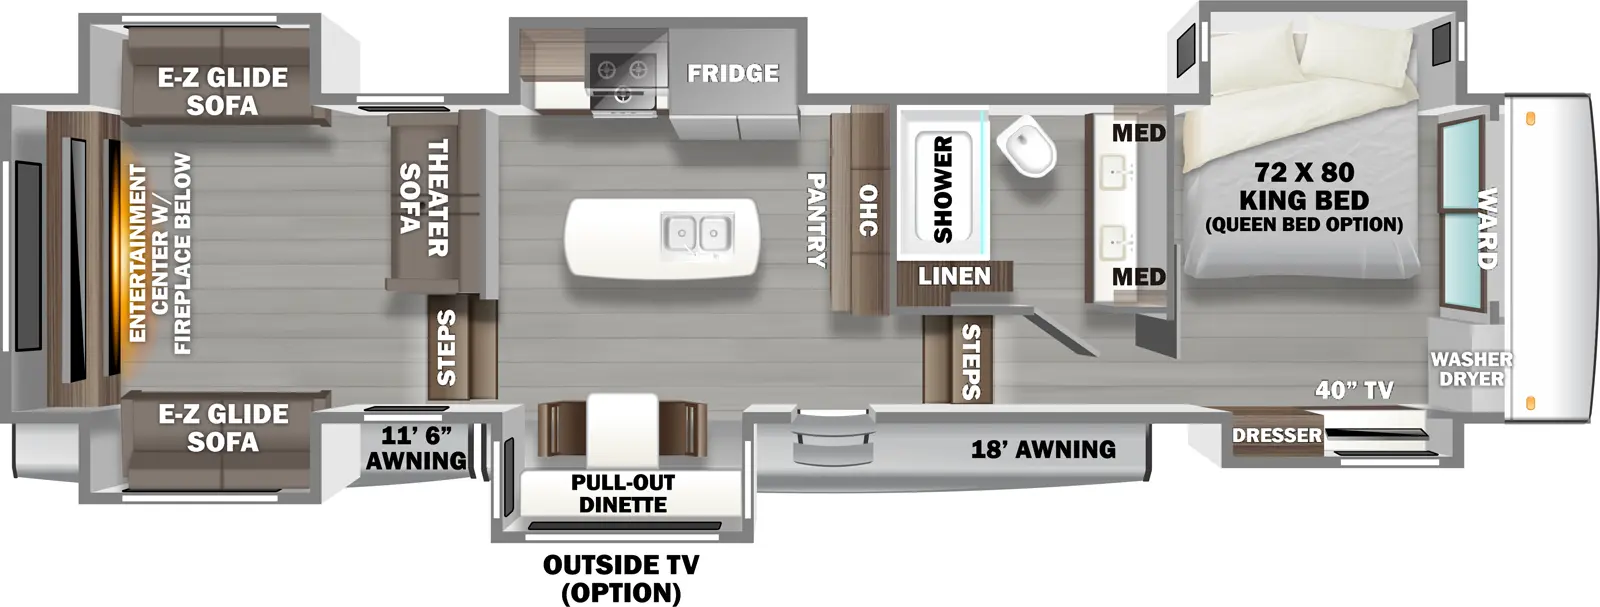 The 419RD has 6 slideouts and one entry. Exterior features an 11 foot 6 inch awning, and 18 foot awning, and an optional outside TV. Interior layout front to back: wardrobe with washer/dryer, off-door side king bed slideout (optional queen bed), and door side slideout with dresser and TV; off-door side full bathroom with dual sinks and medicine cabinets, and linen closet; steps down to main living area and entry; pantry and overhead cabinet along inner wall; kitchen island with sink; off-door side slideout with refrigerator, cooktop, and microwave; door side slideout with pull-out dinette; steps up to rear living room with theater sofa along inner wall, opposing E-Z glide sofa slideouts, and rear entertainment center with fireplace below.